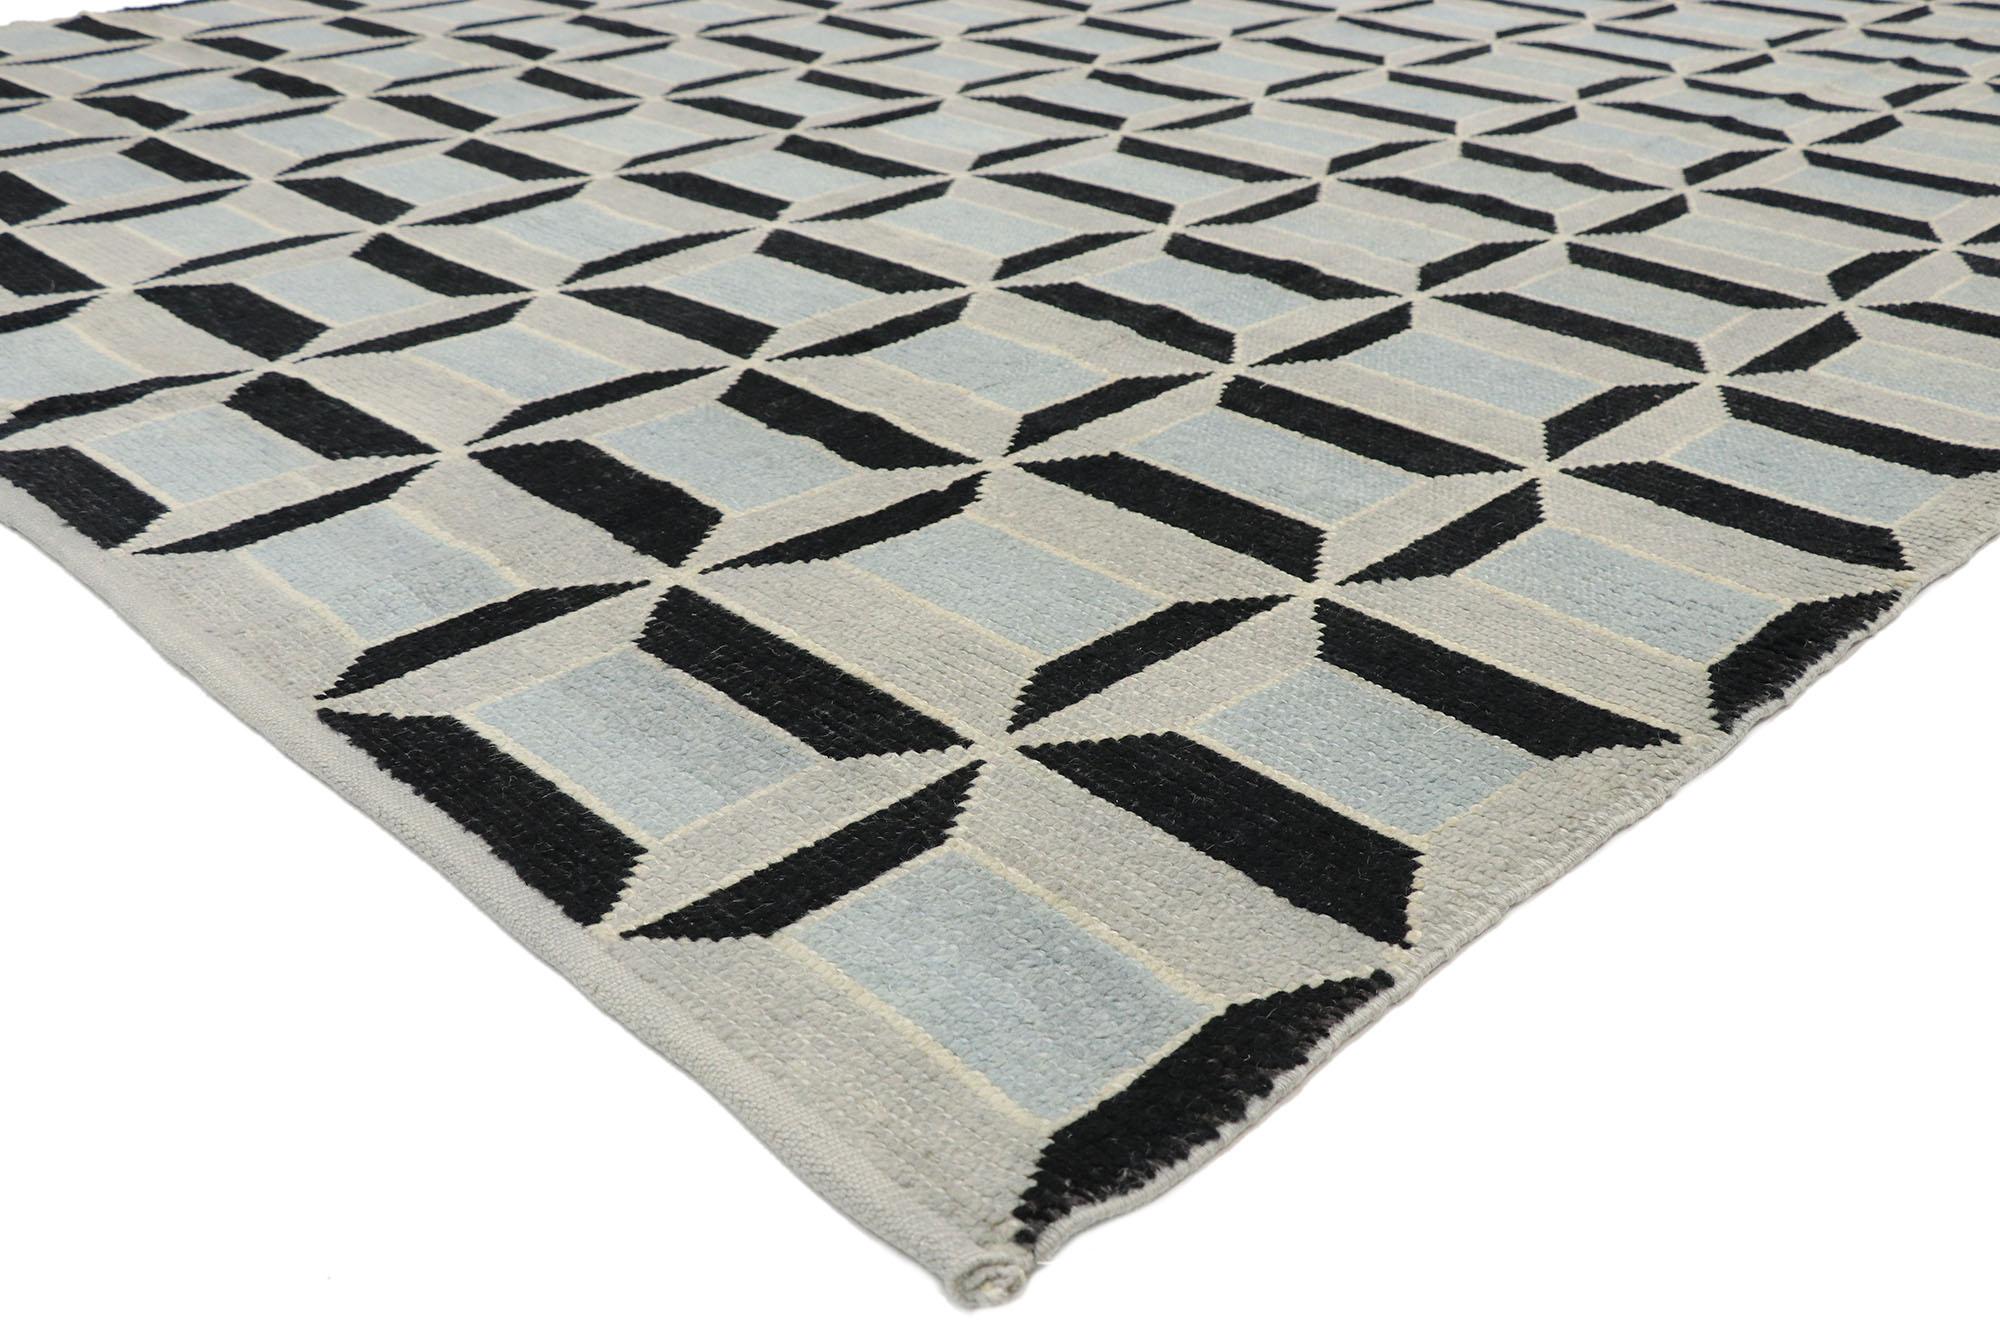 52996, new contemporary Moroccan rug with cubist Bauhaus style 09’00 x 13’01. Showcasing a bold expressive design with Cubist Bauhaus style, this hand knotted wool contemporary Moroccan style rug is a captivating vision of woven beauty. It features